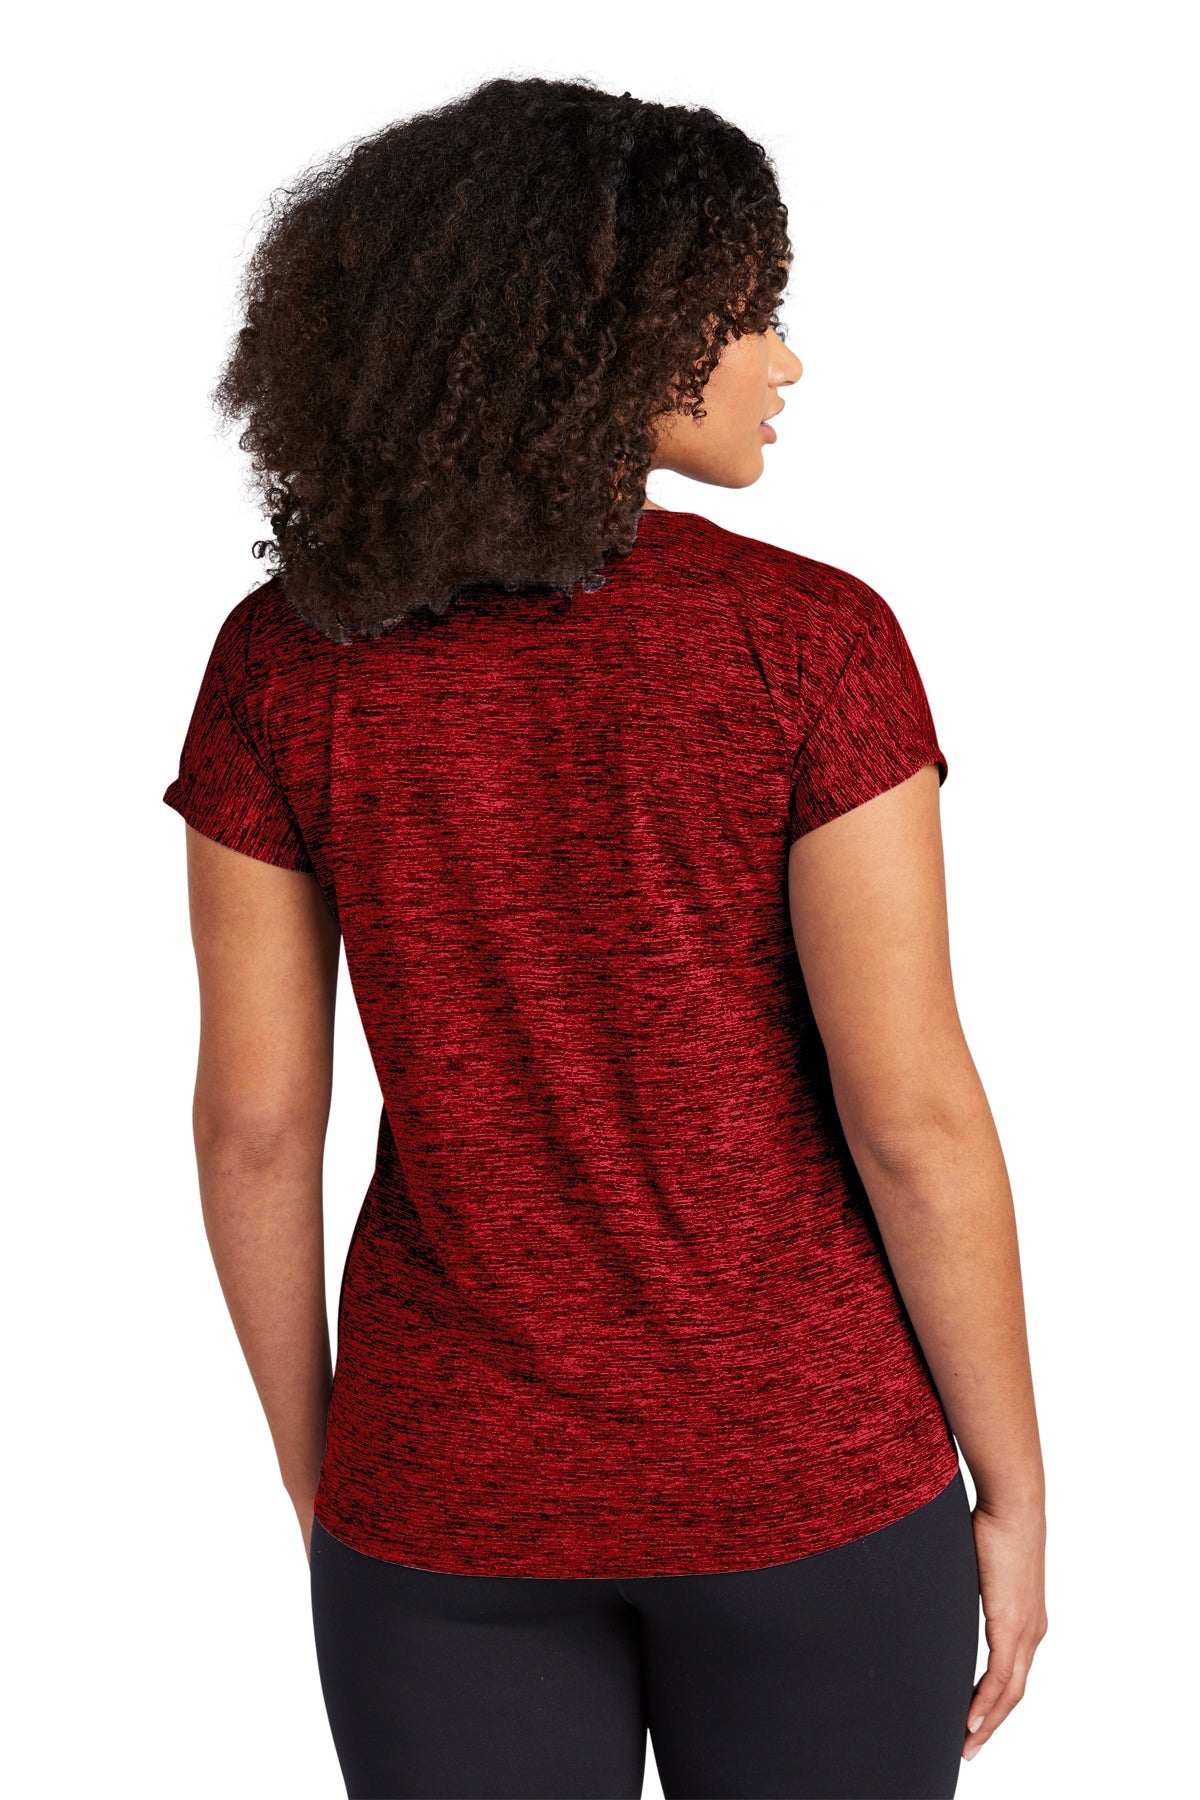 Sport-Tek Ladies PosiCharge Electric Heather Customized Sporty Tee's, Deep Red- Black Electric